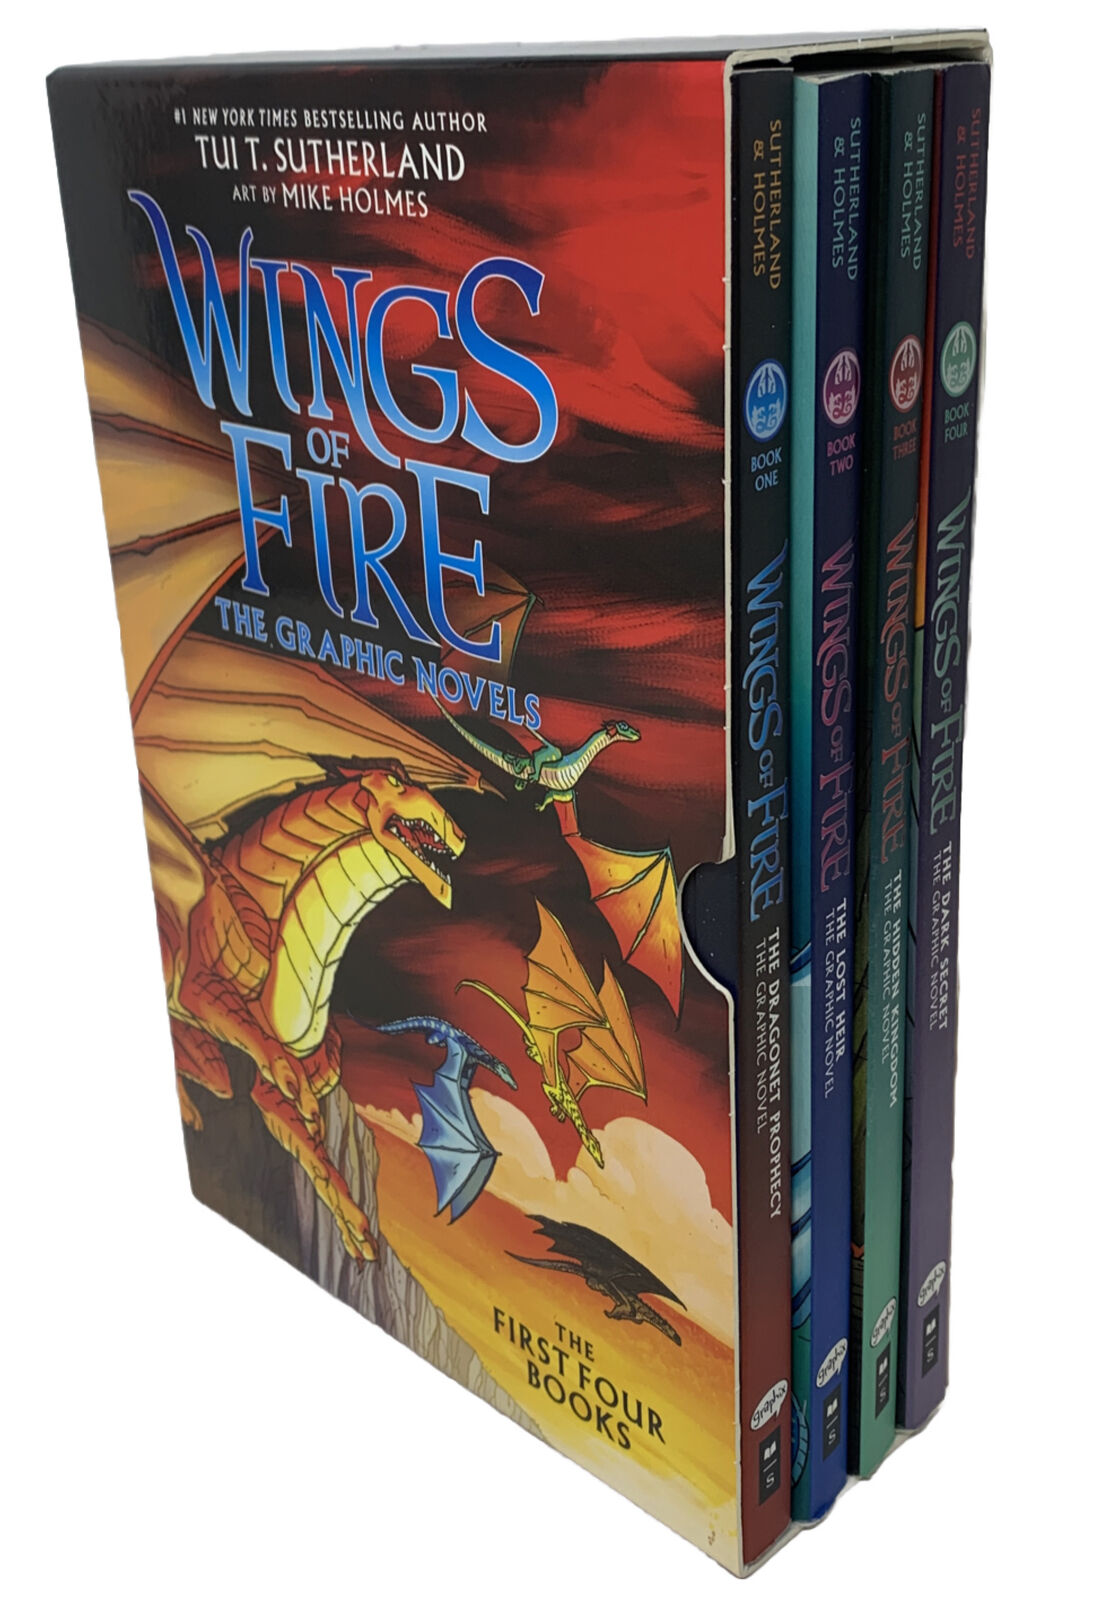 Wings of Fire The Graphic Novels Box Set Of 4 Paperback Books Tui T. Sutherland